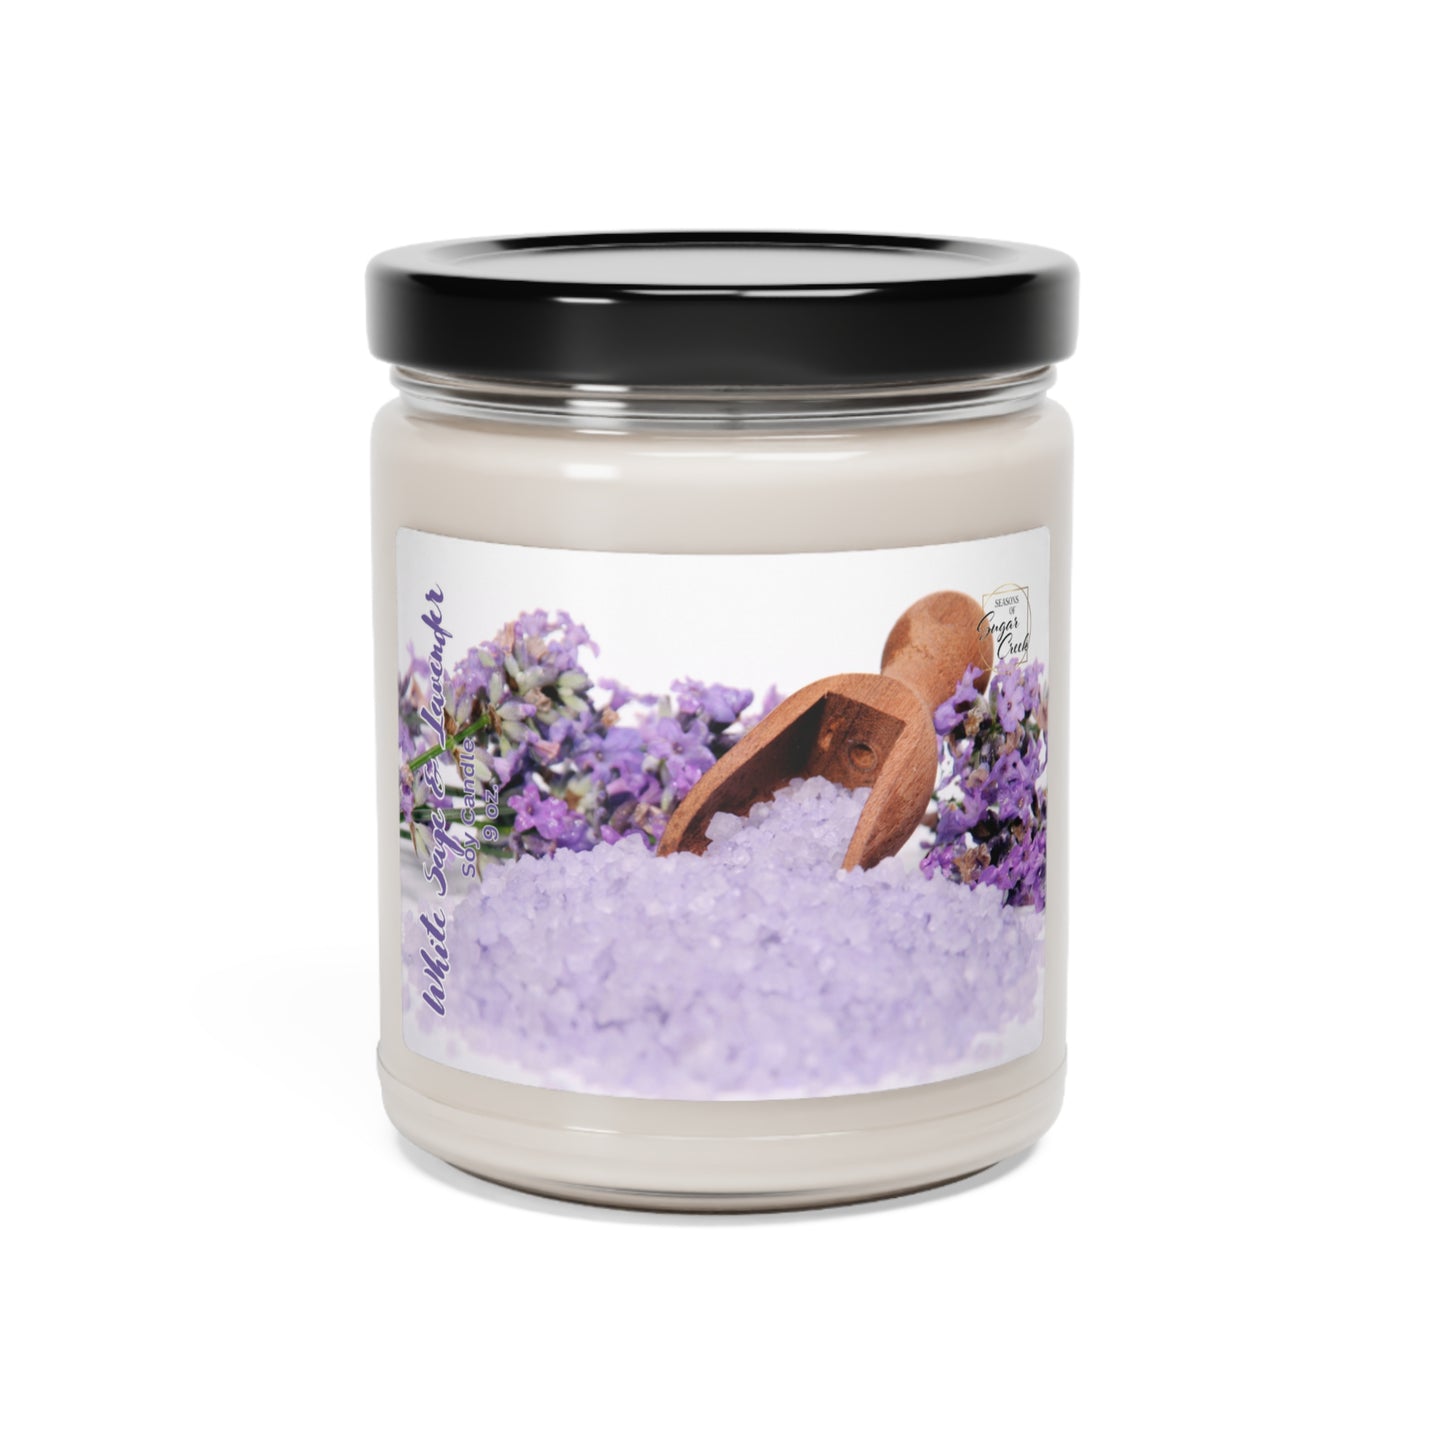 SEASONS OF SUGAR CREEK SCENTED SOY CANDLE